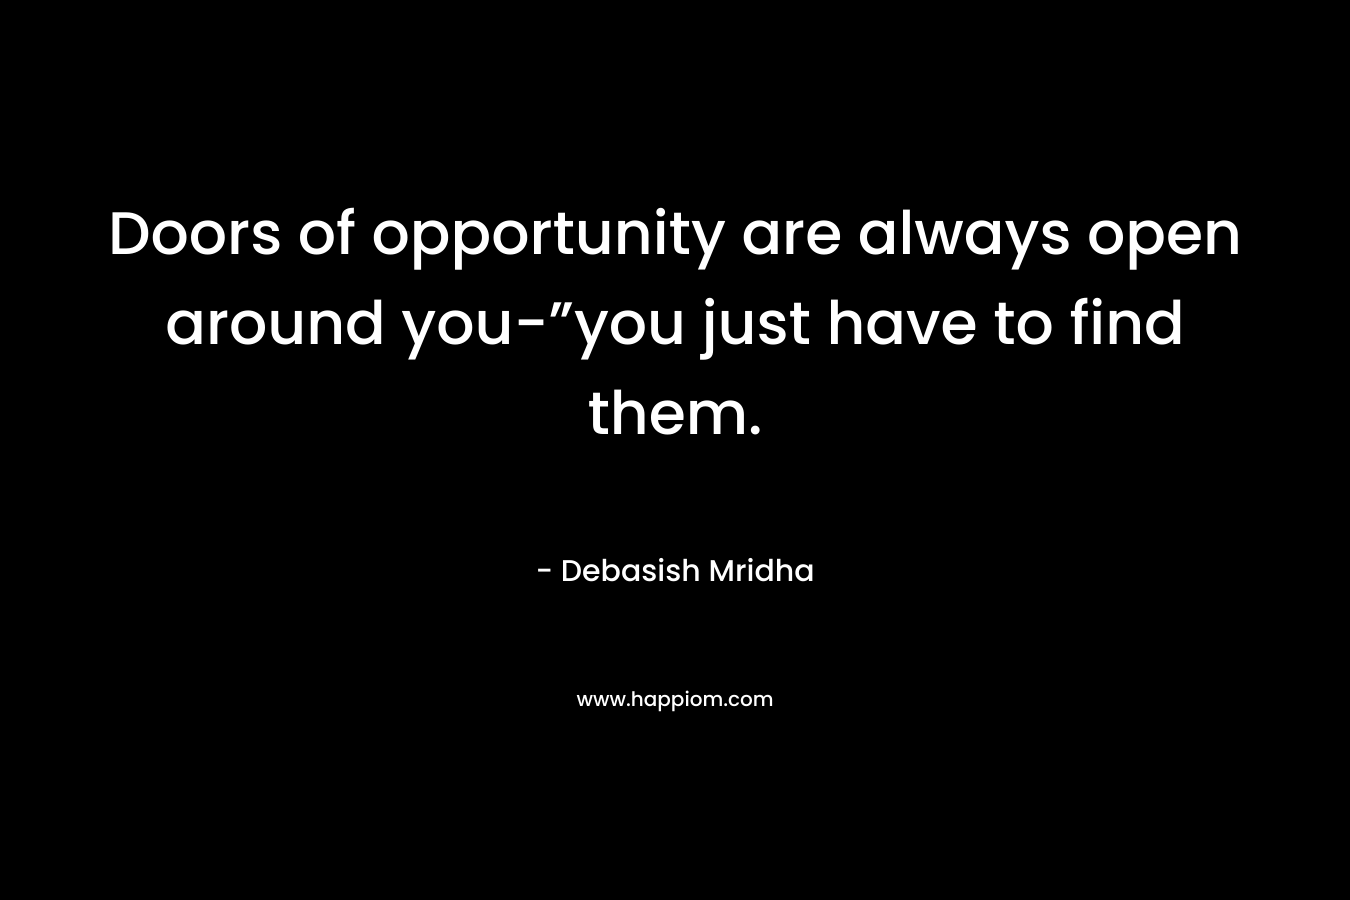 Doors of opportunity are always open around you-”you just have to find them. – Debasish Mridha